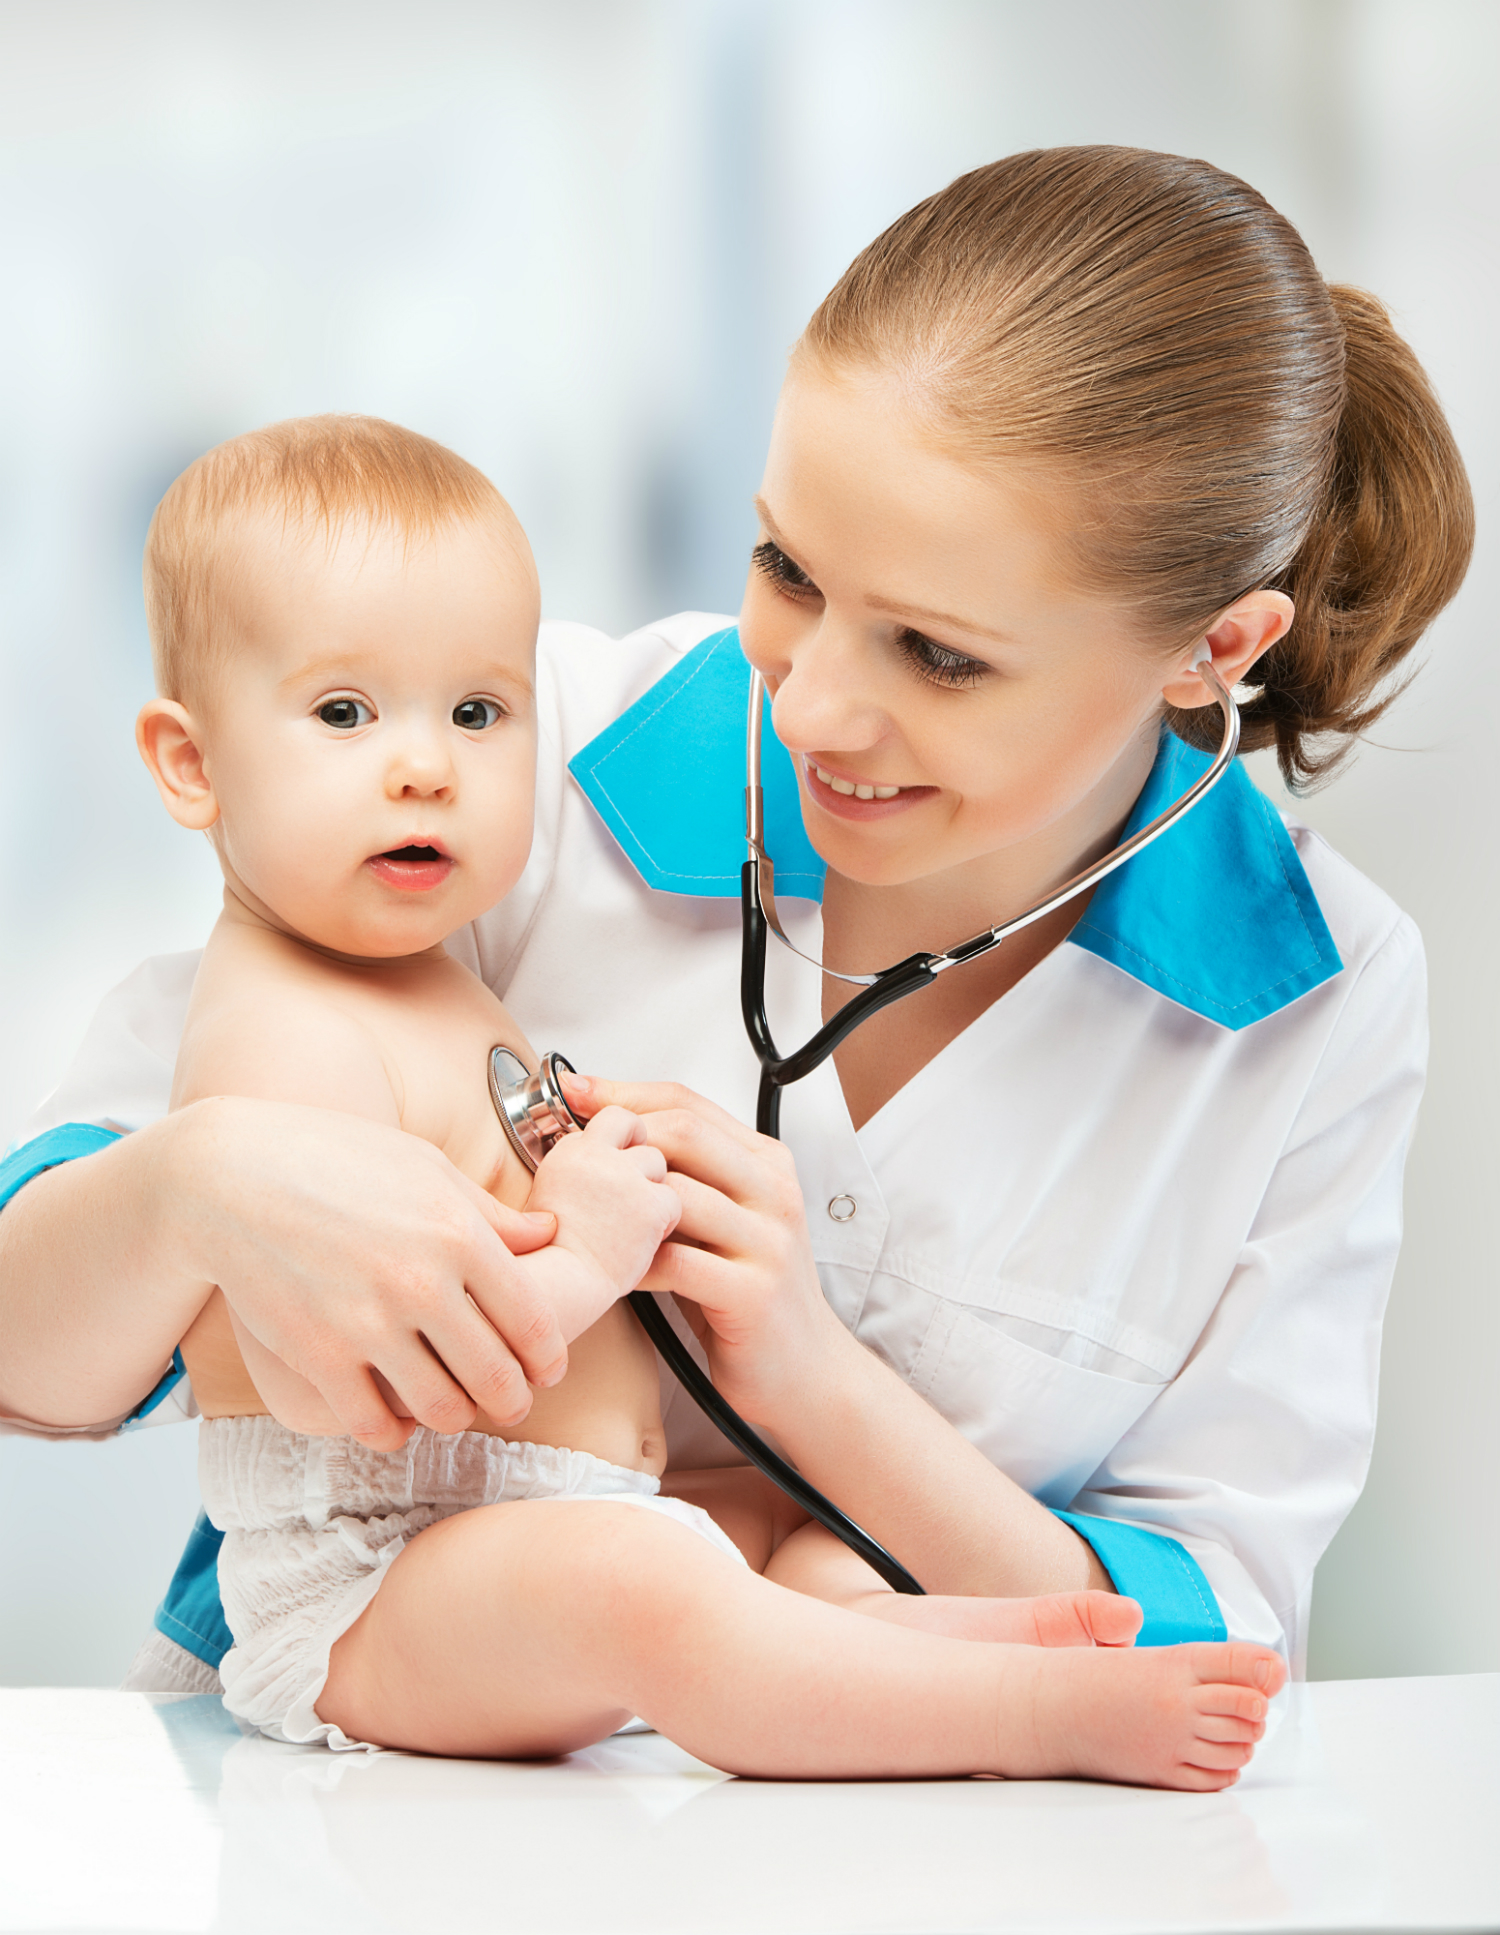 How to Find a Good Pediatrician